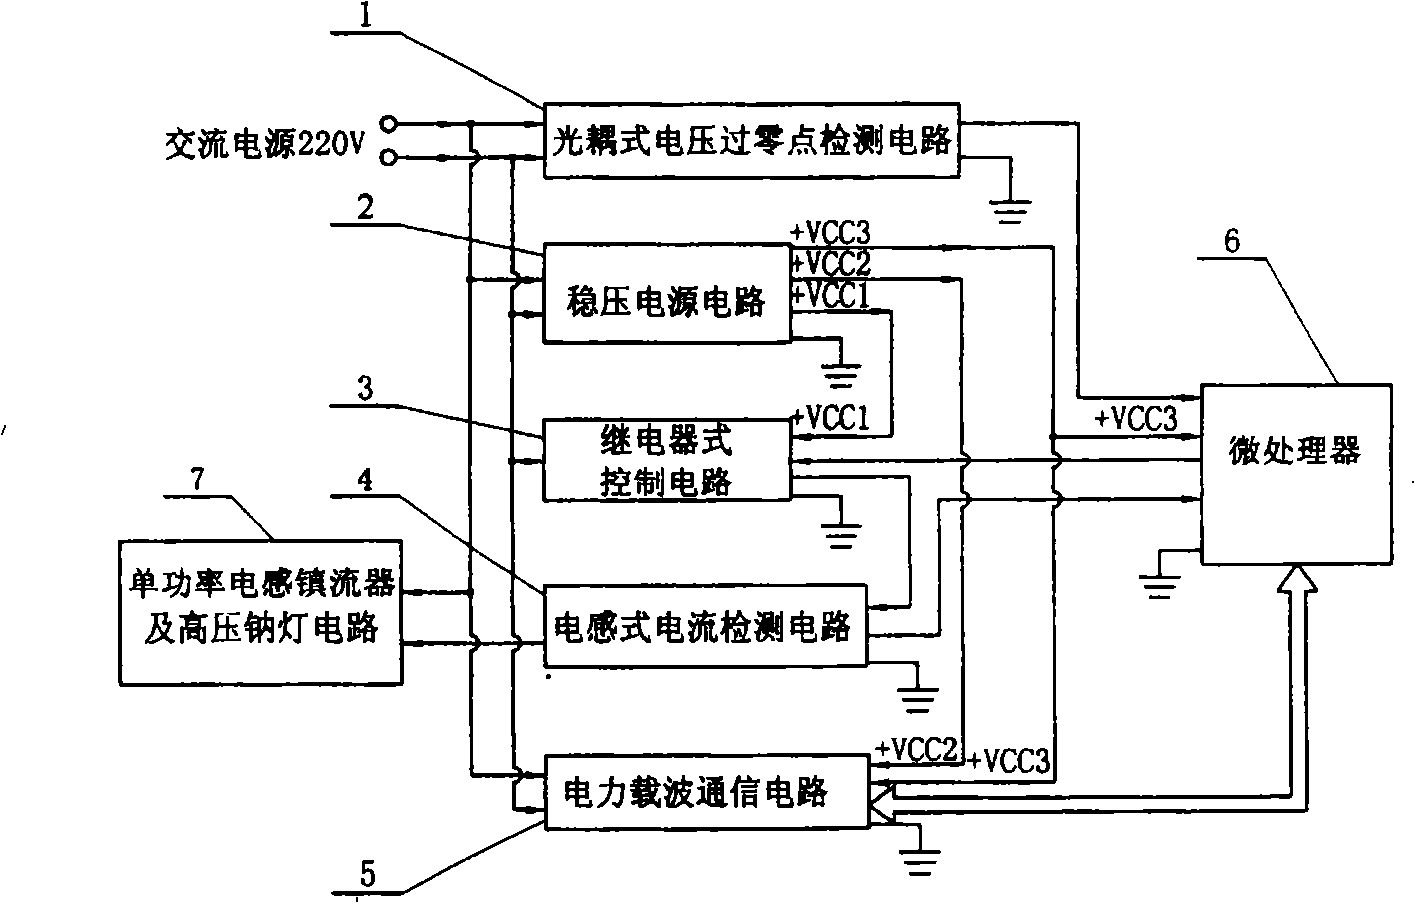 Road lamp inspection device and method